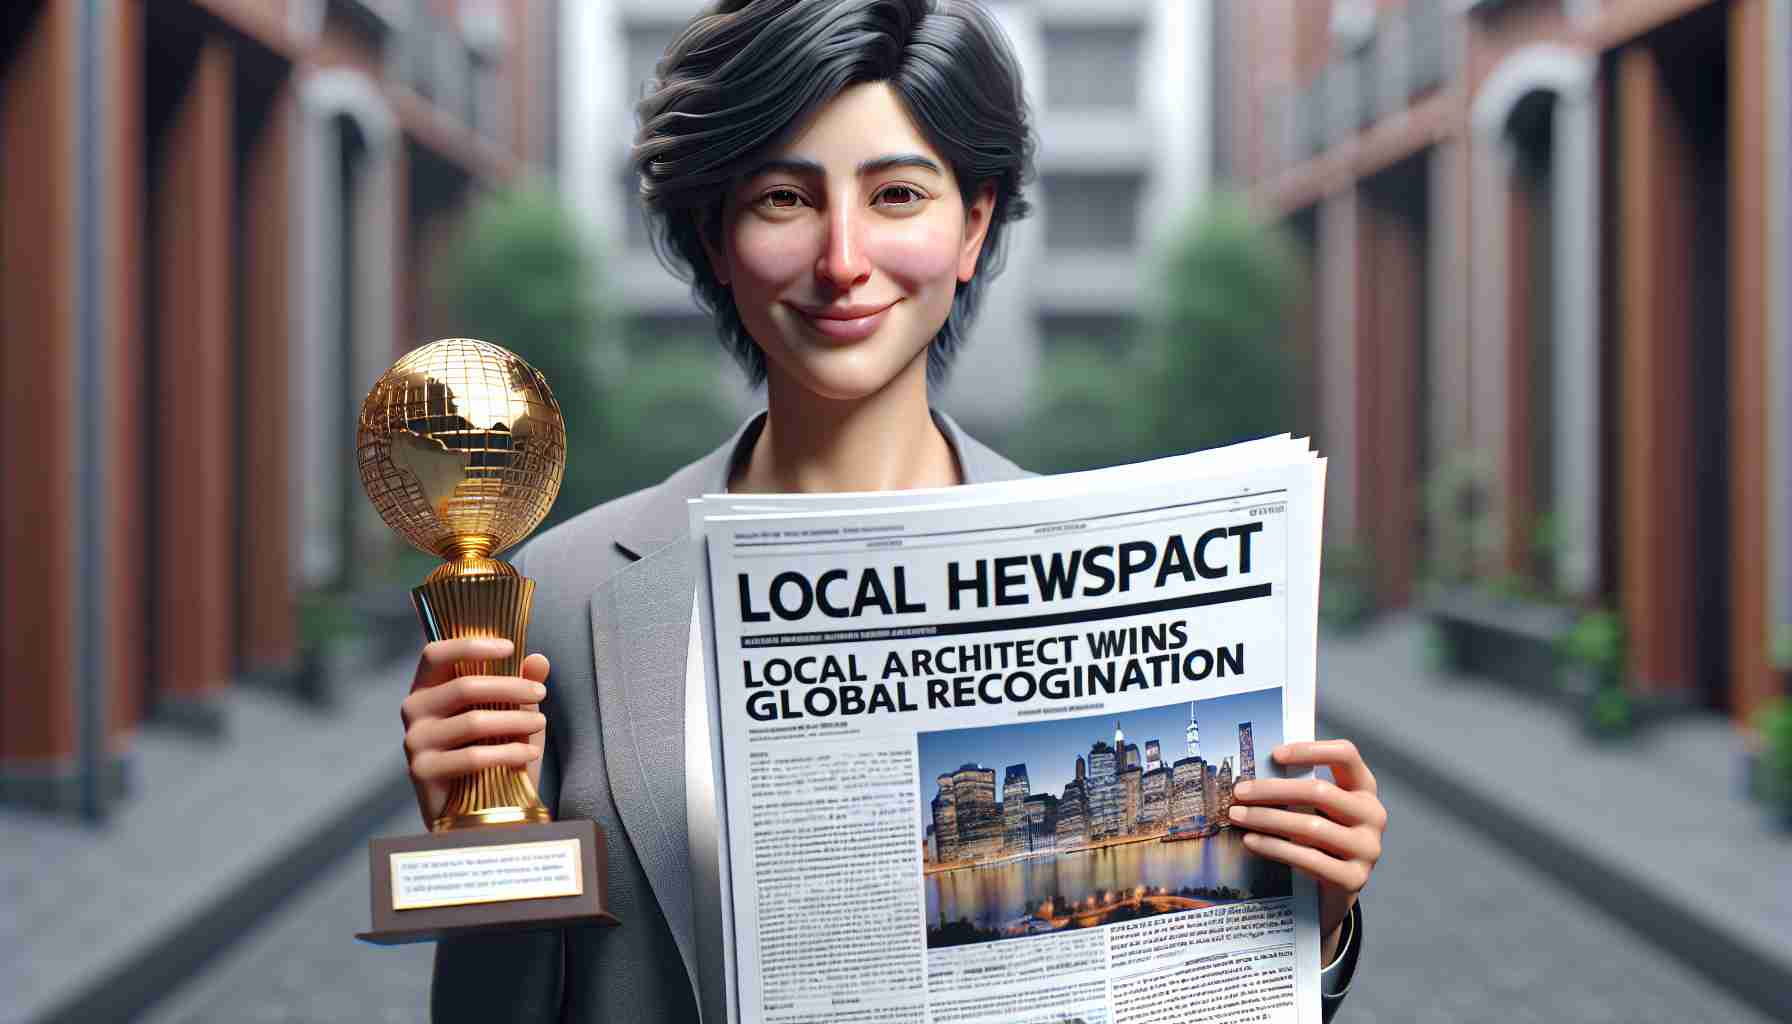 A high-definition, realistic image shows a headline in a local newspaper announcing 'Local Architect Wins Global Recognition'. The article includes a photograph of the proud architect, who is a South Asian male, holding the trophy in her hands. Her face is filled with satisfaction and achievement.